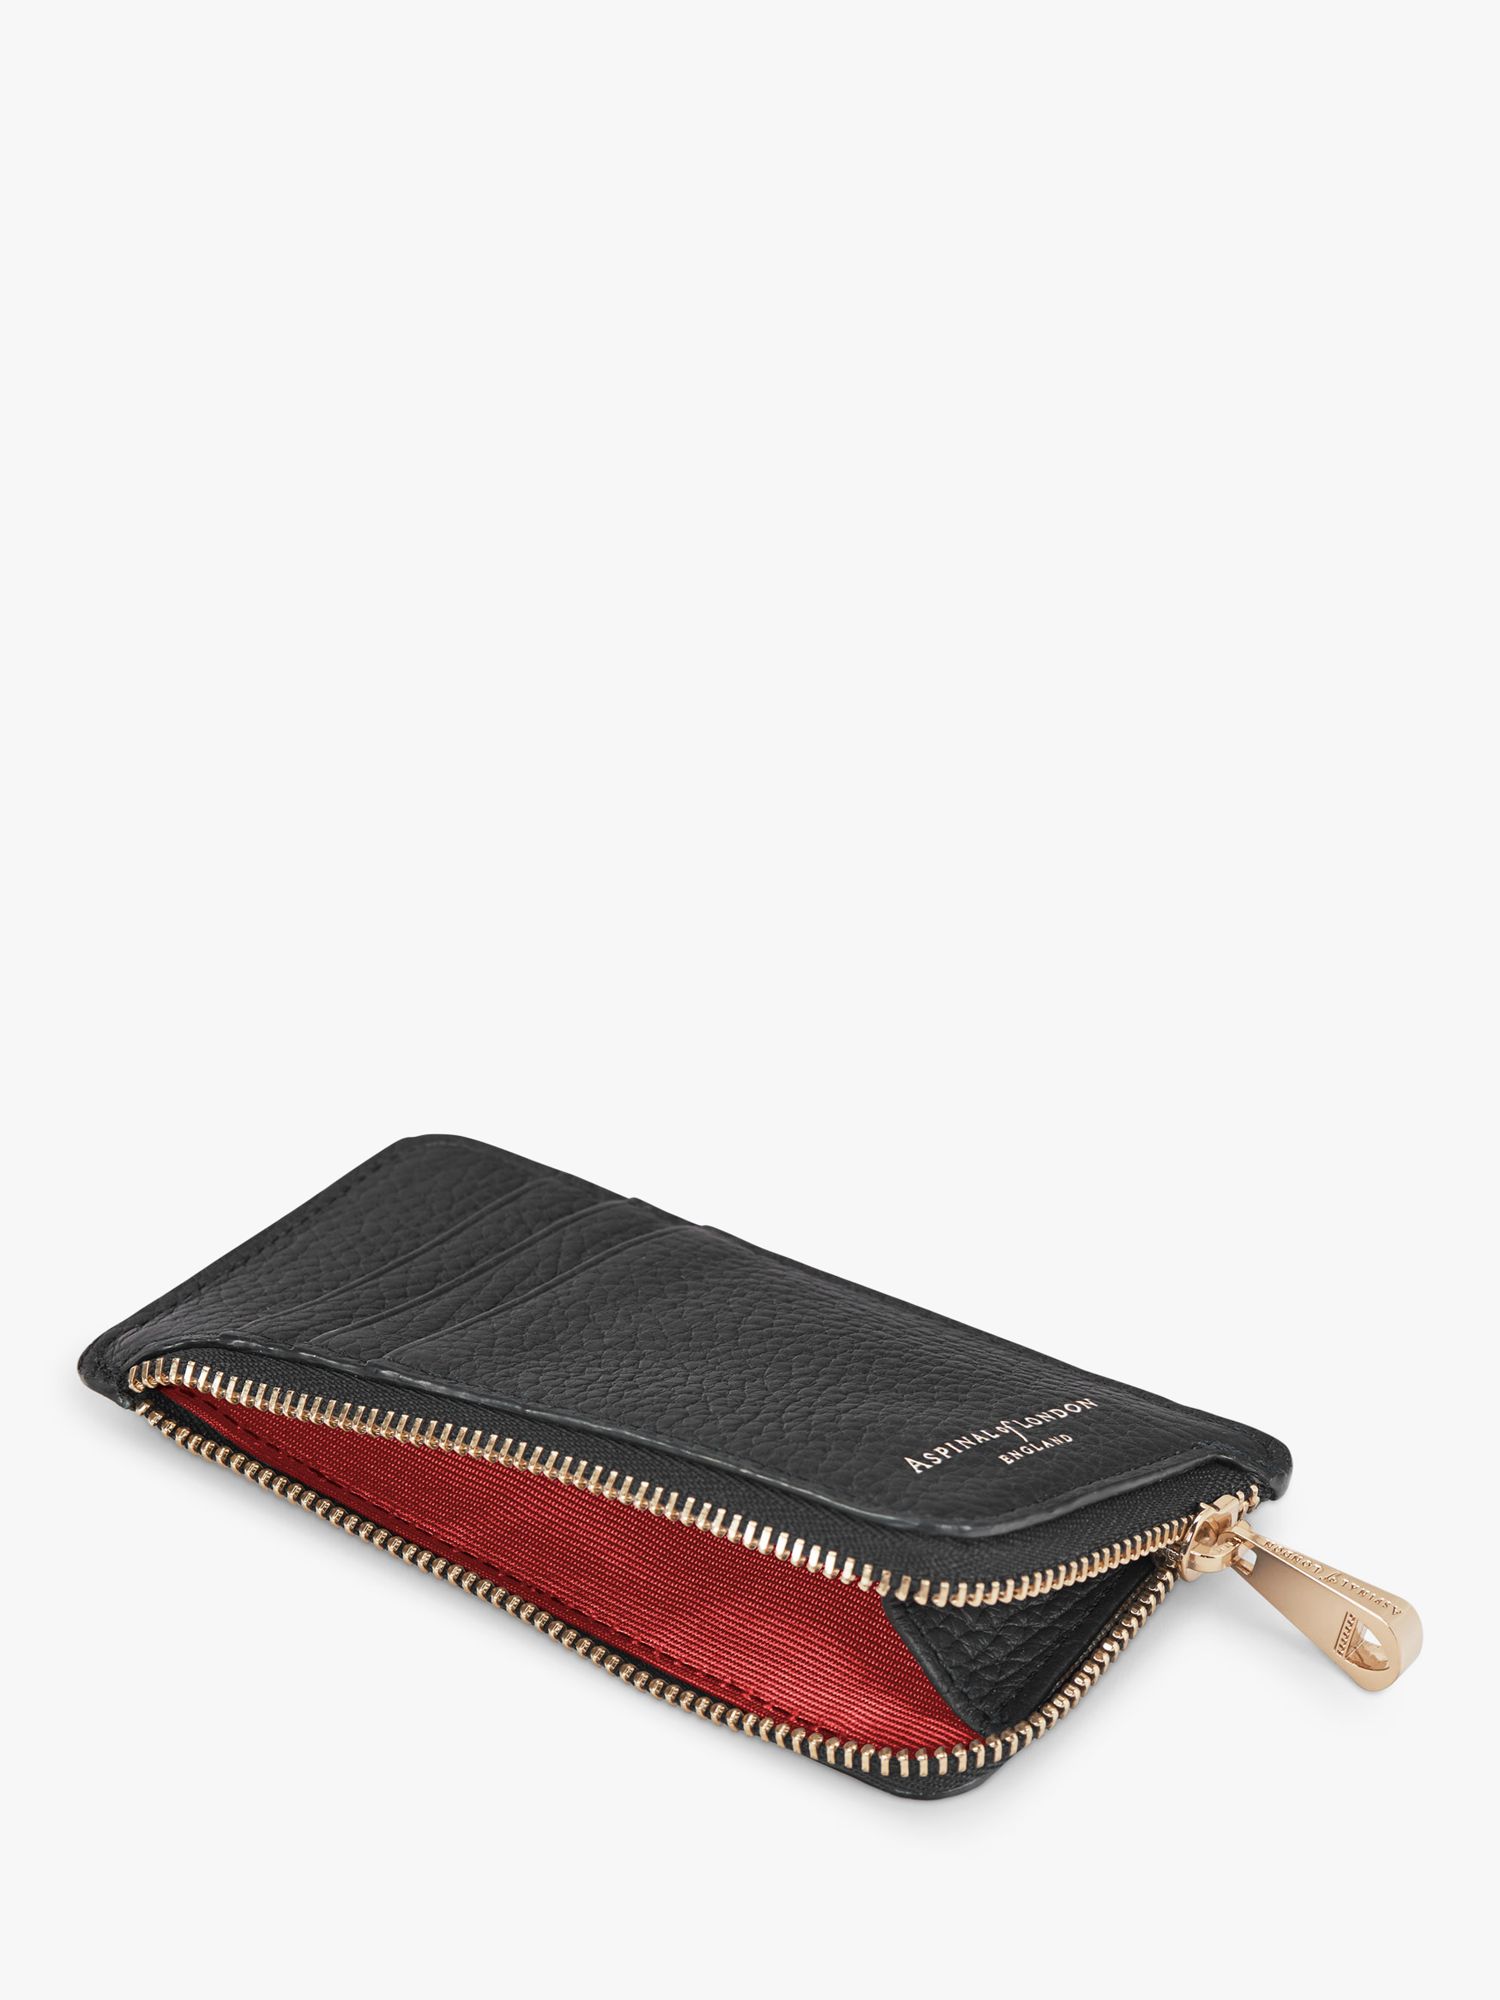 Buy Aspinal of London Pebble Leather Zipped Coin and Card Holder Online at johnlewis.com